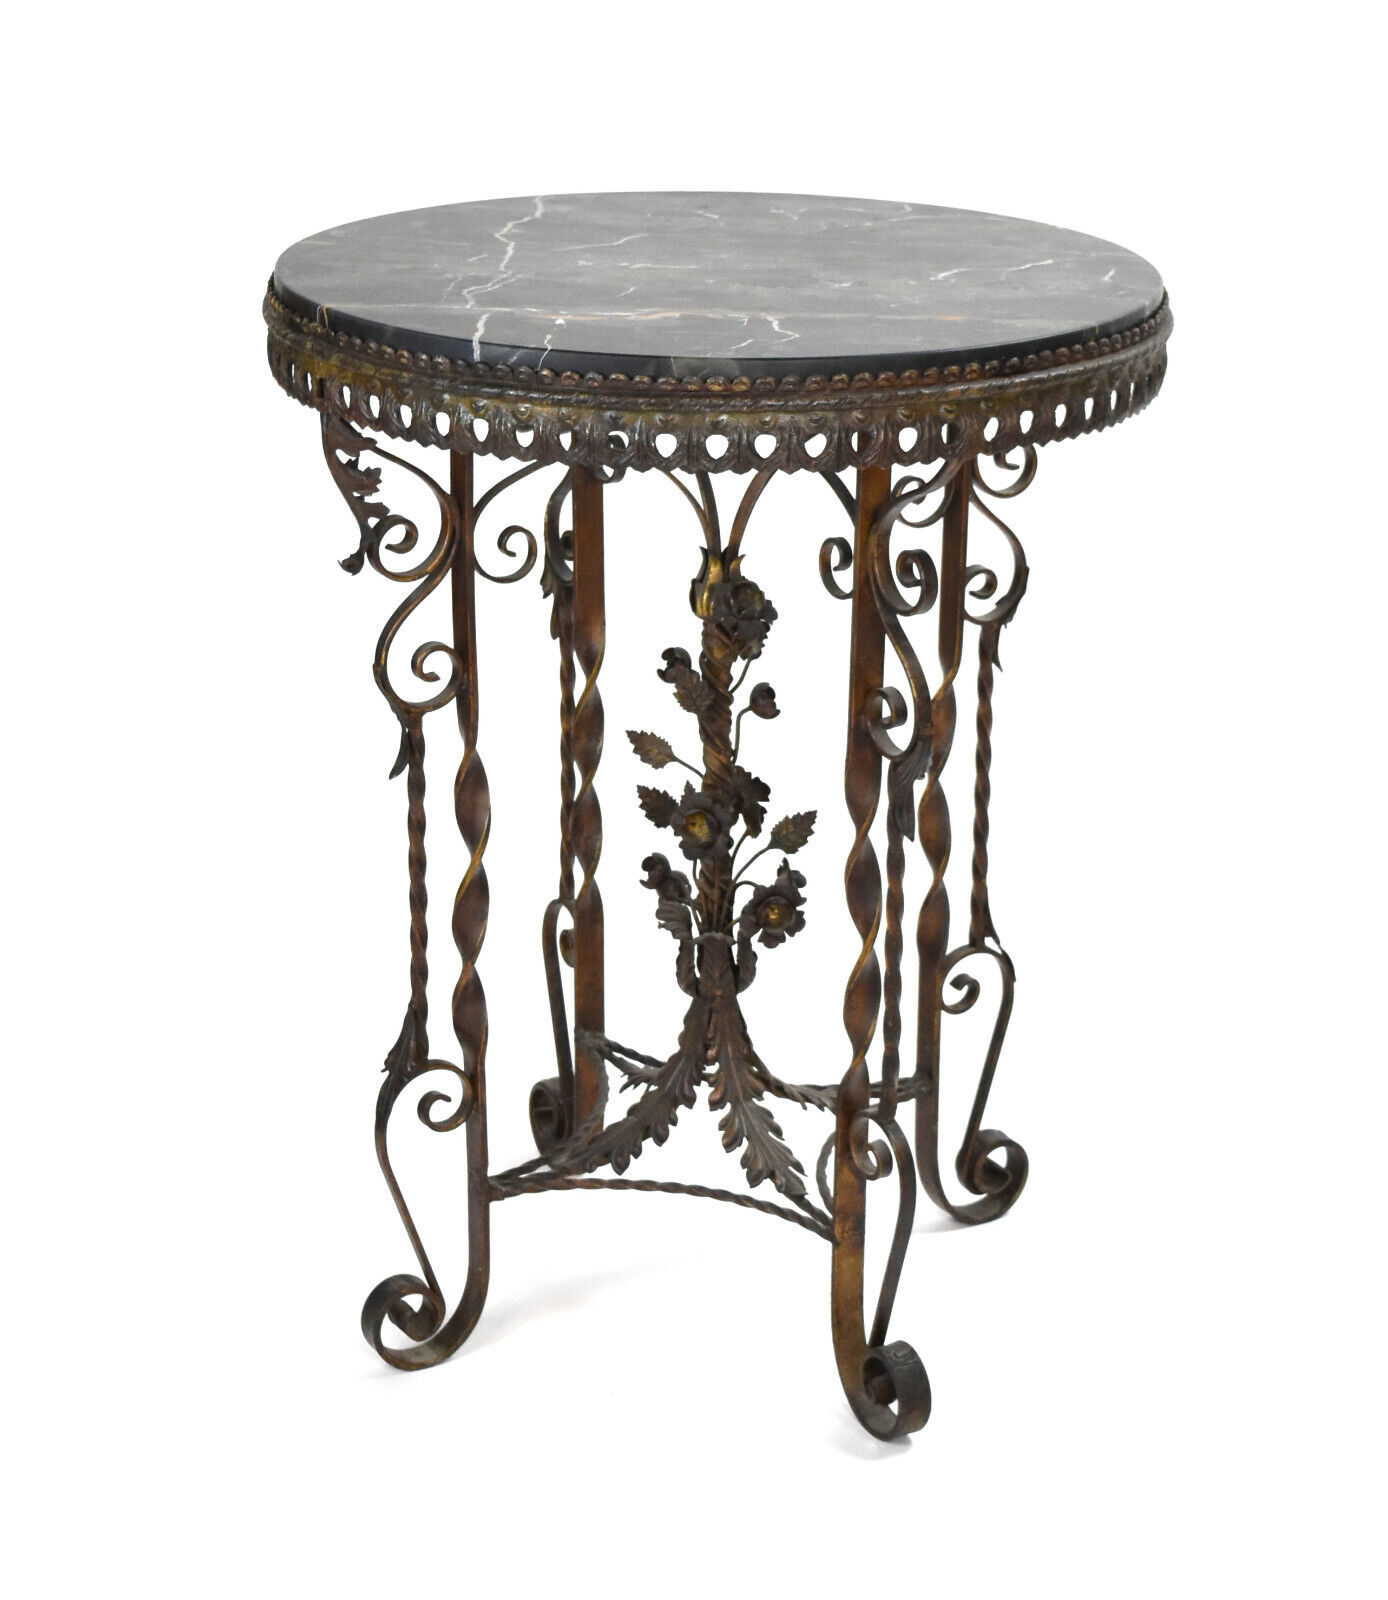 Antique 1920’s Wrought Iron Floral Motif Table w Figured Black Marble Top